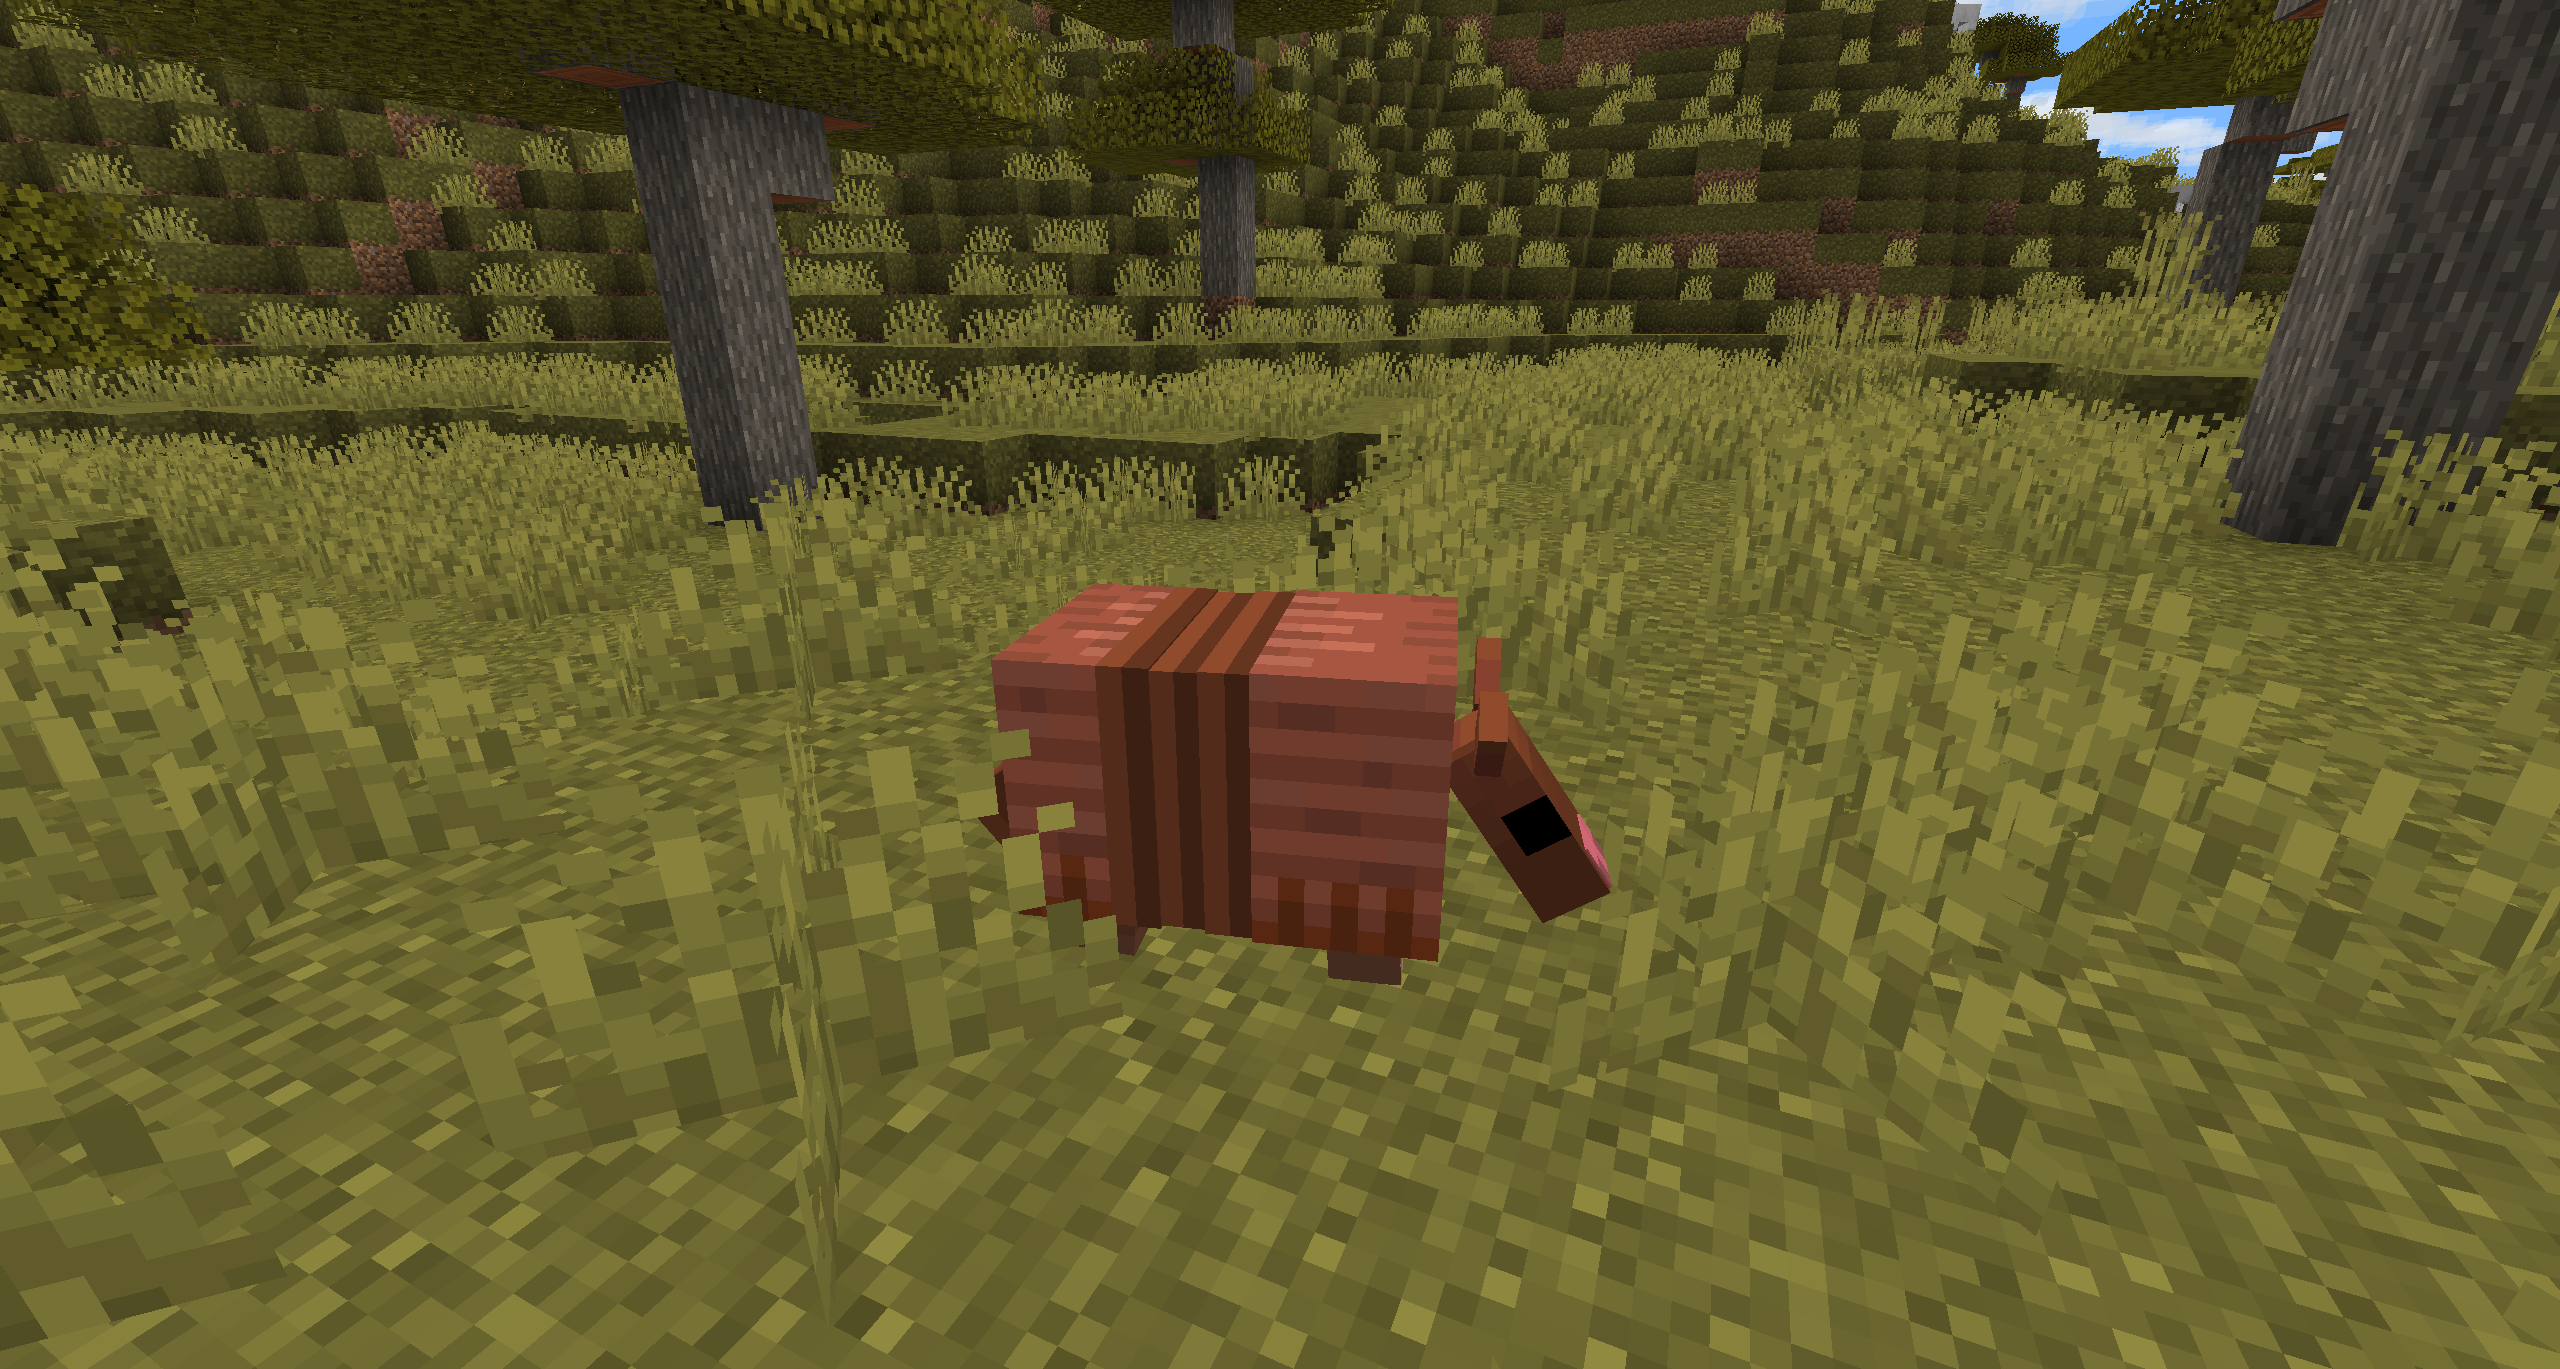 Armadillo Takes the Mob Vote, Minecraft Update 1.24 Coming Mid